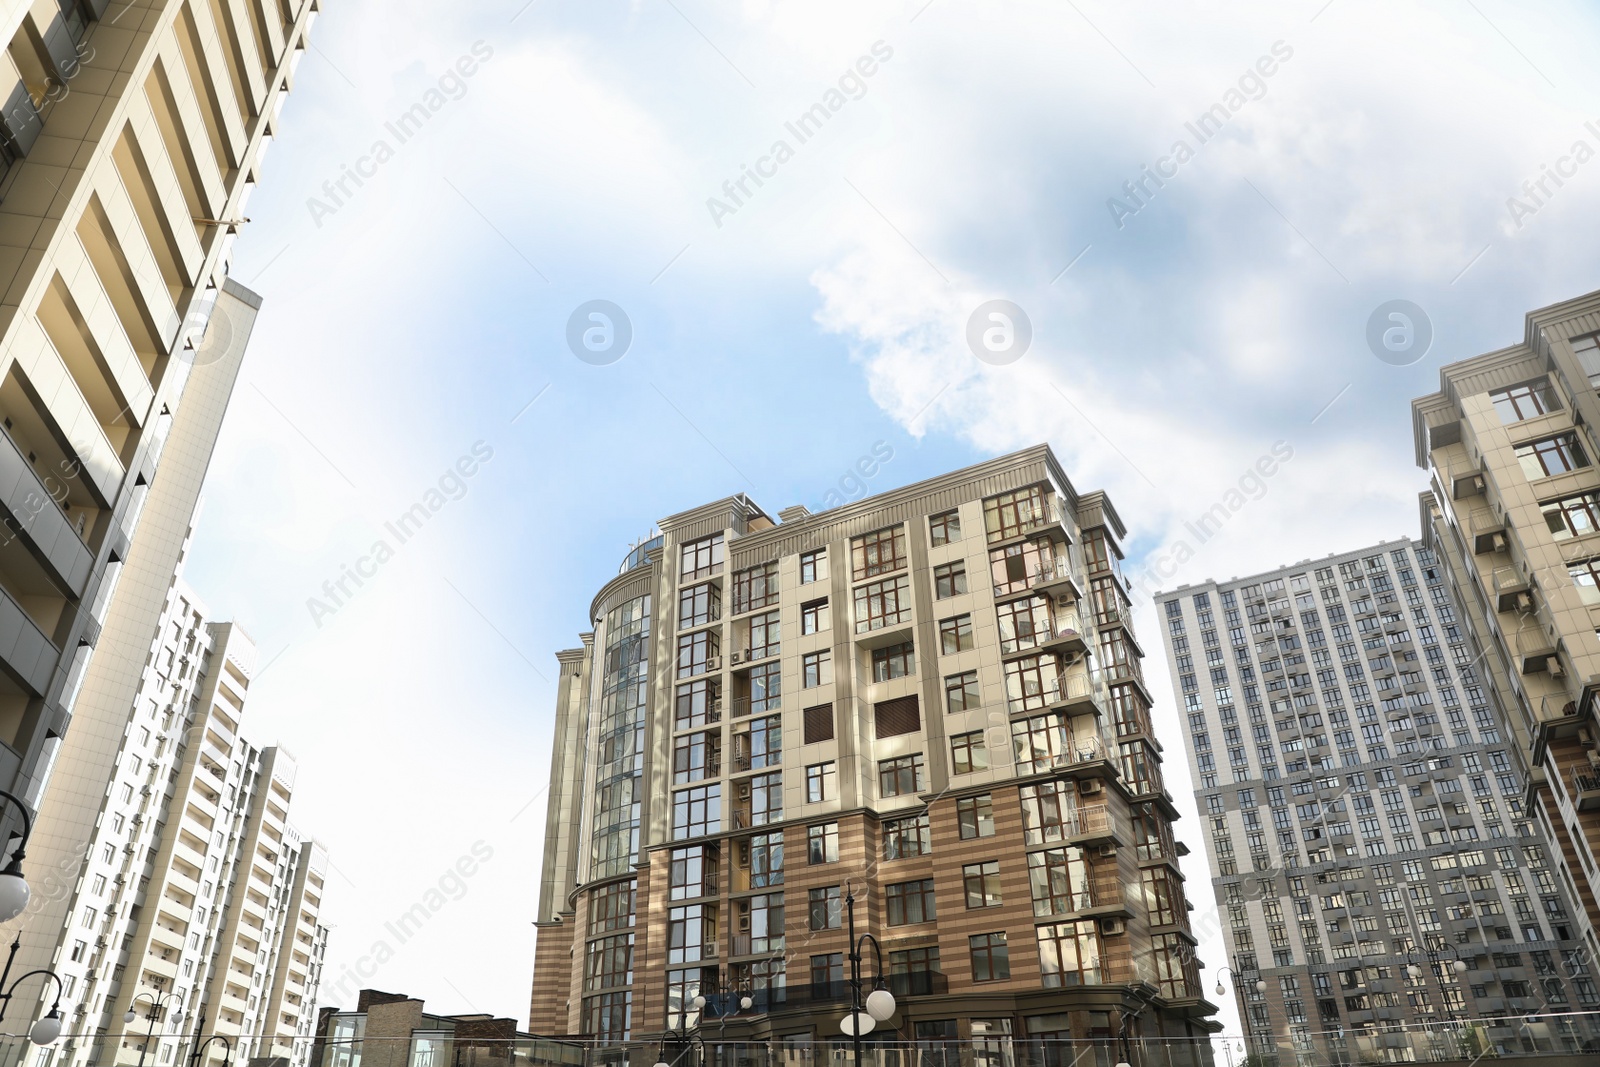 Photo of Modern buildings with tinted windows against sky. Urban architecture